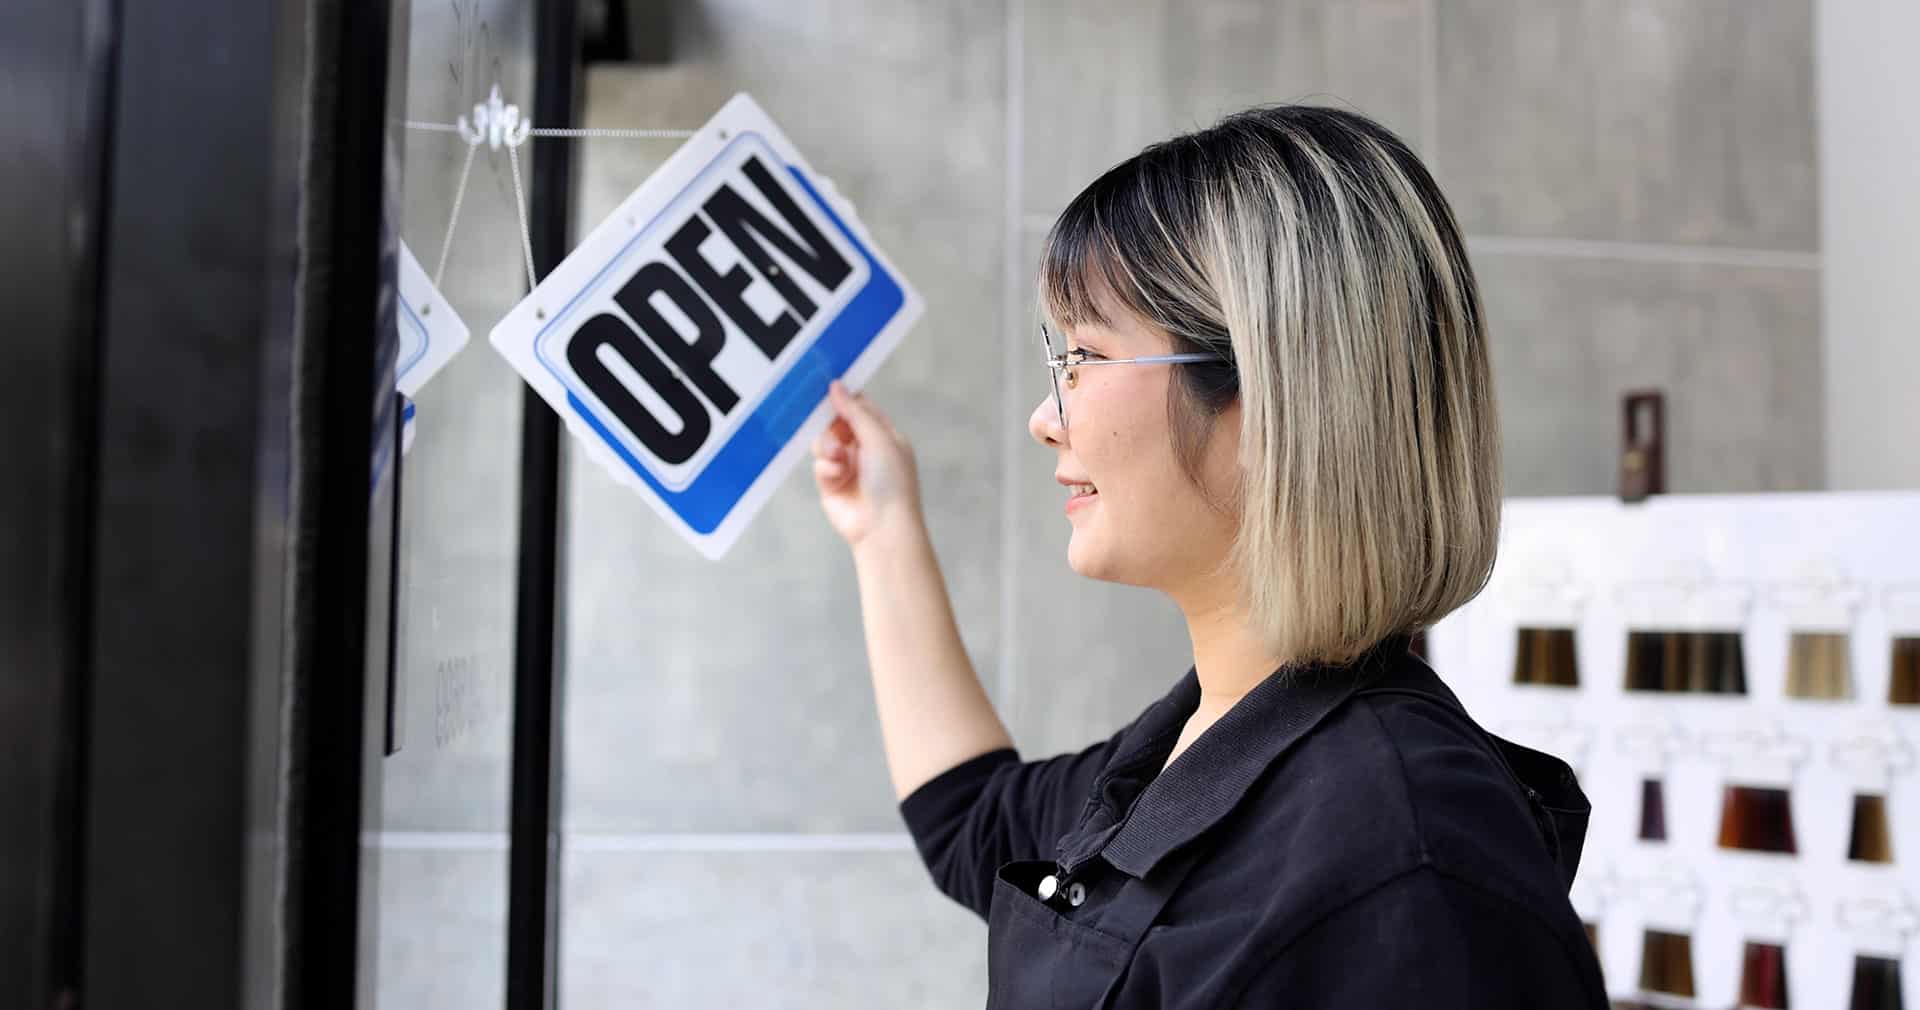 salon owner turning over an open sign on a door